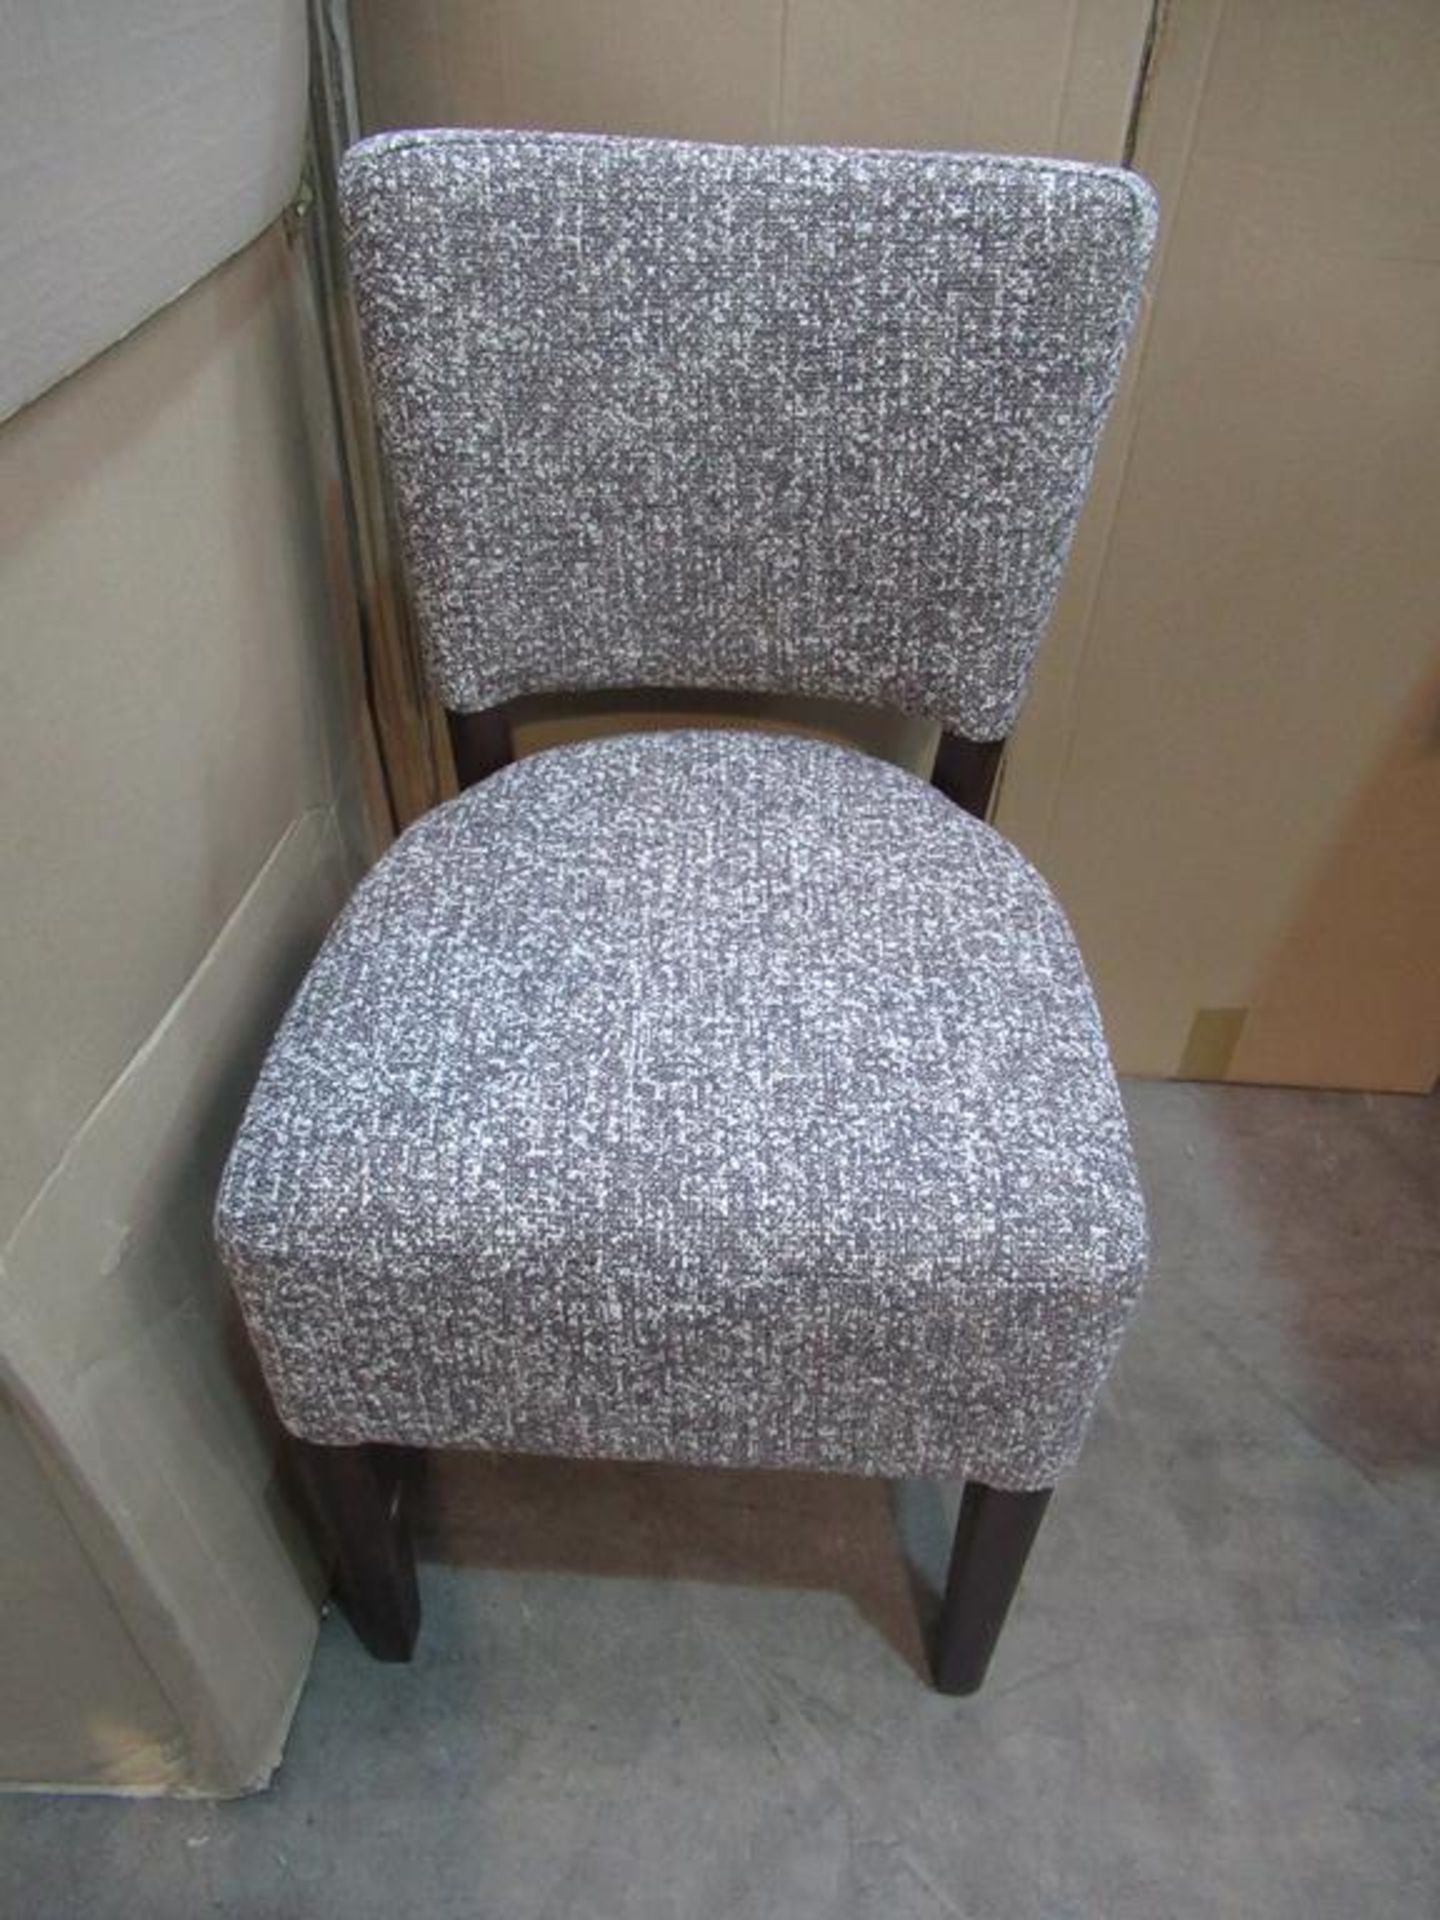 2 x Memphis Standard Dining Chairs (Speckle Truffle)